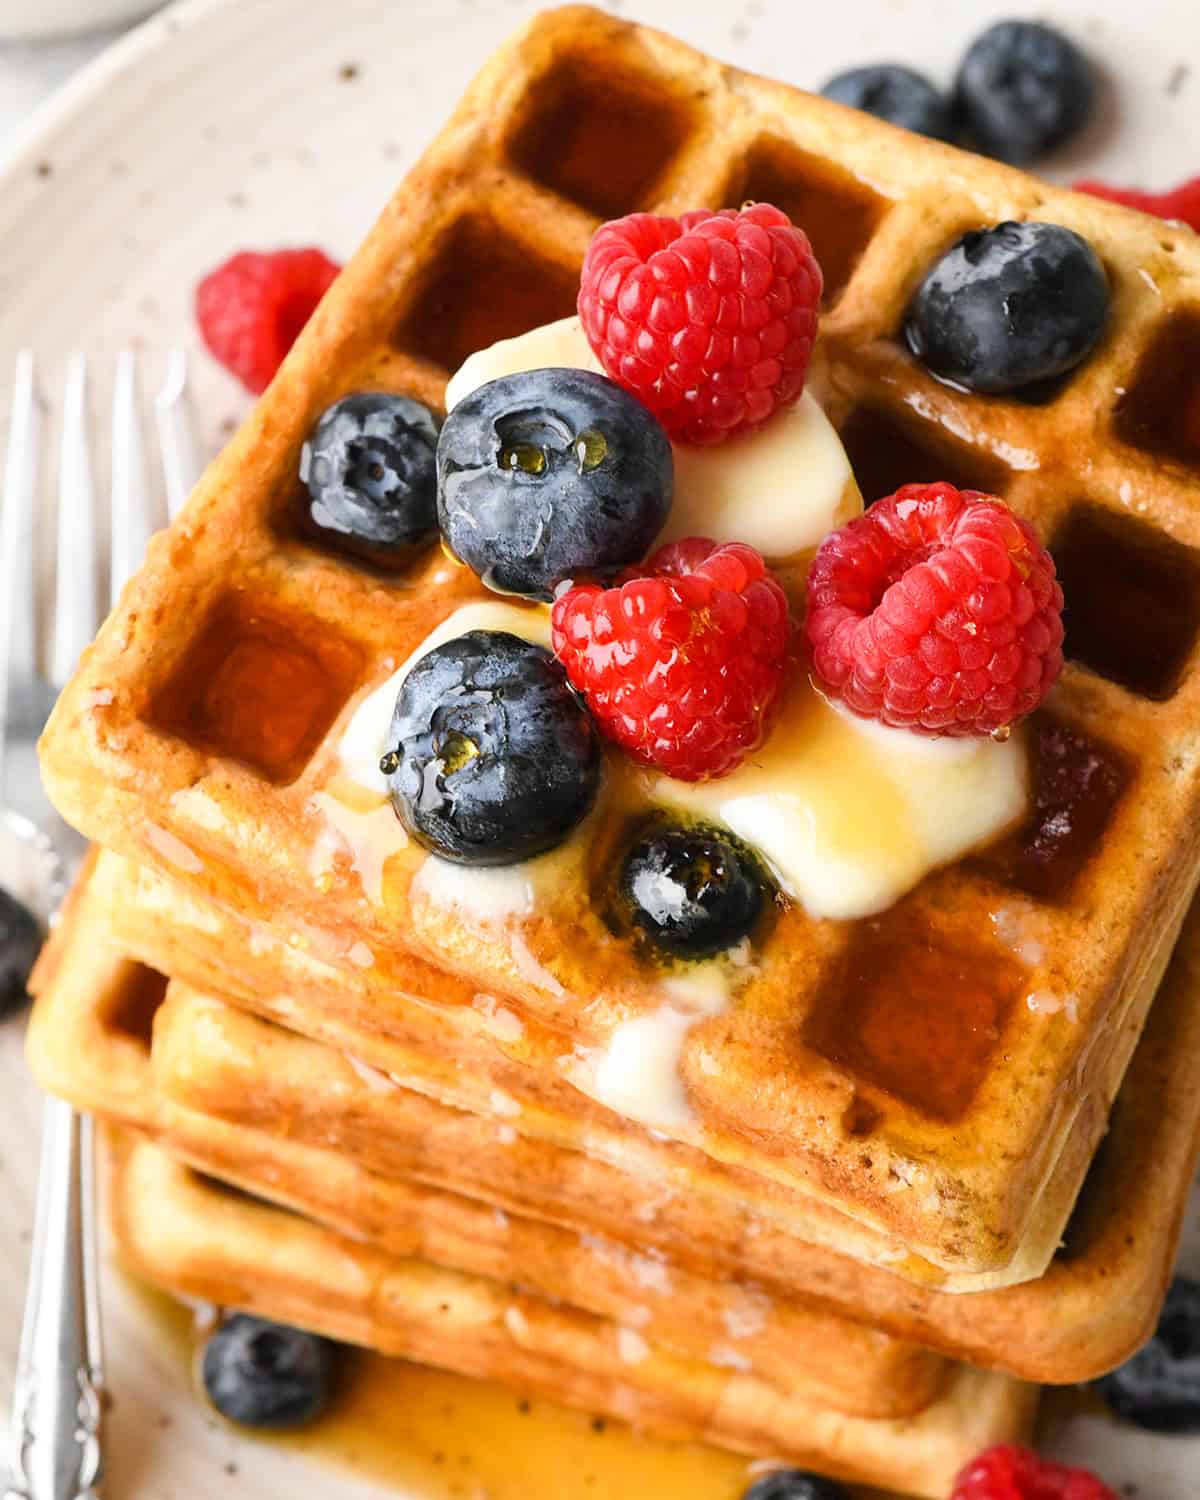 a stack of 5 homemade waffles topped with butter, syrup and berries